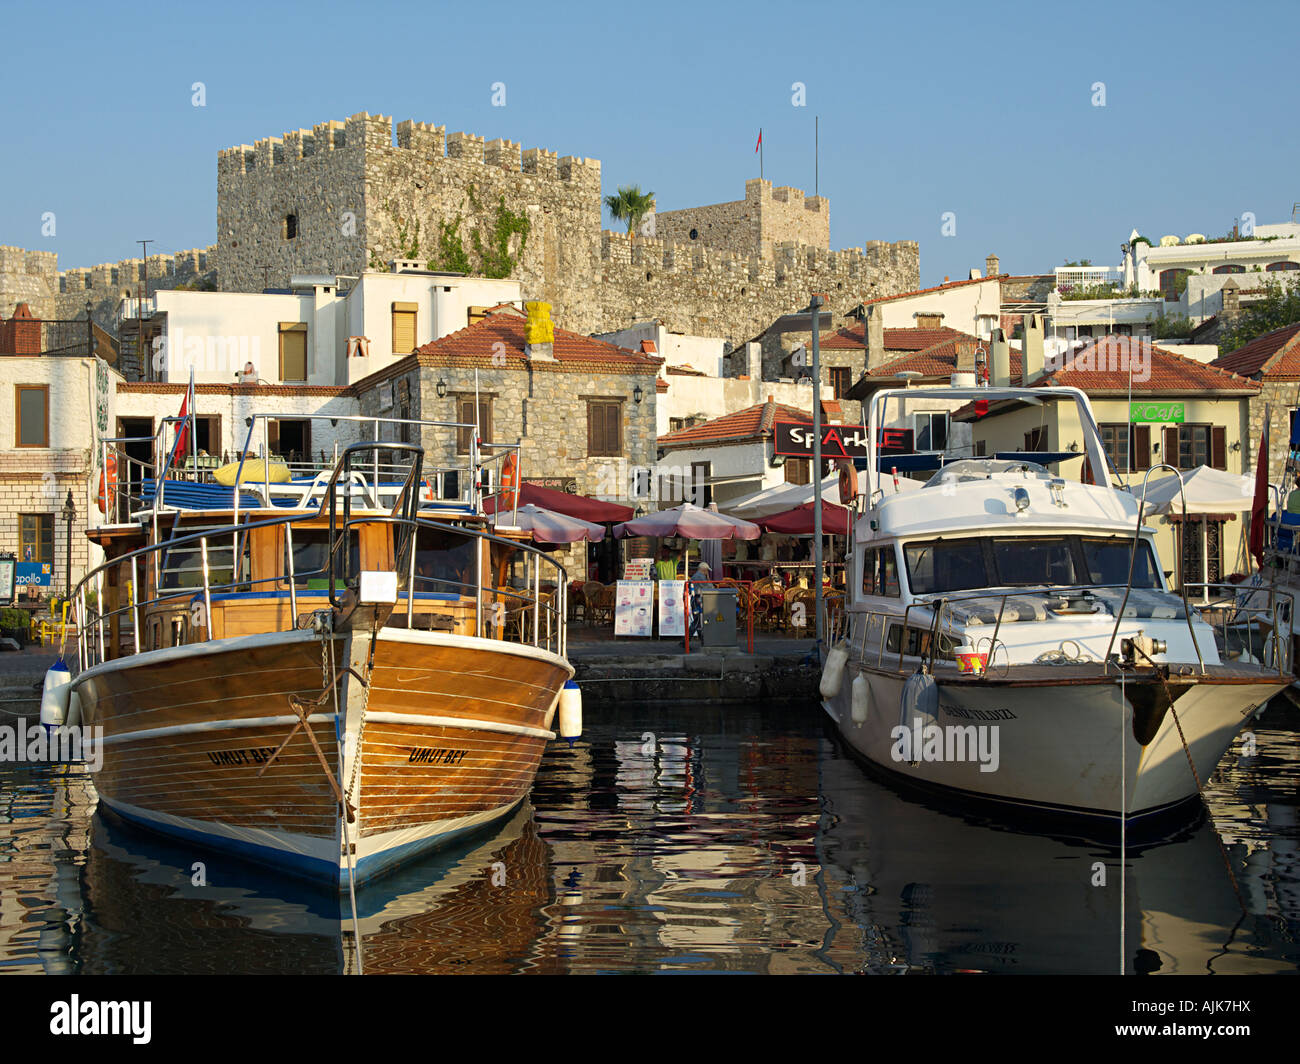 MARMARIS OLD TOWN WITH CASTLE AND MOORED BOATS AT QUAYSIDE, MARMARIS TURKEY Stock Photo